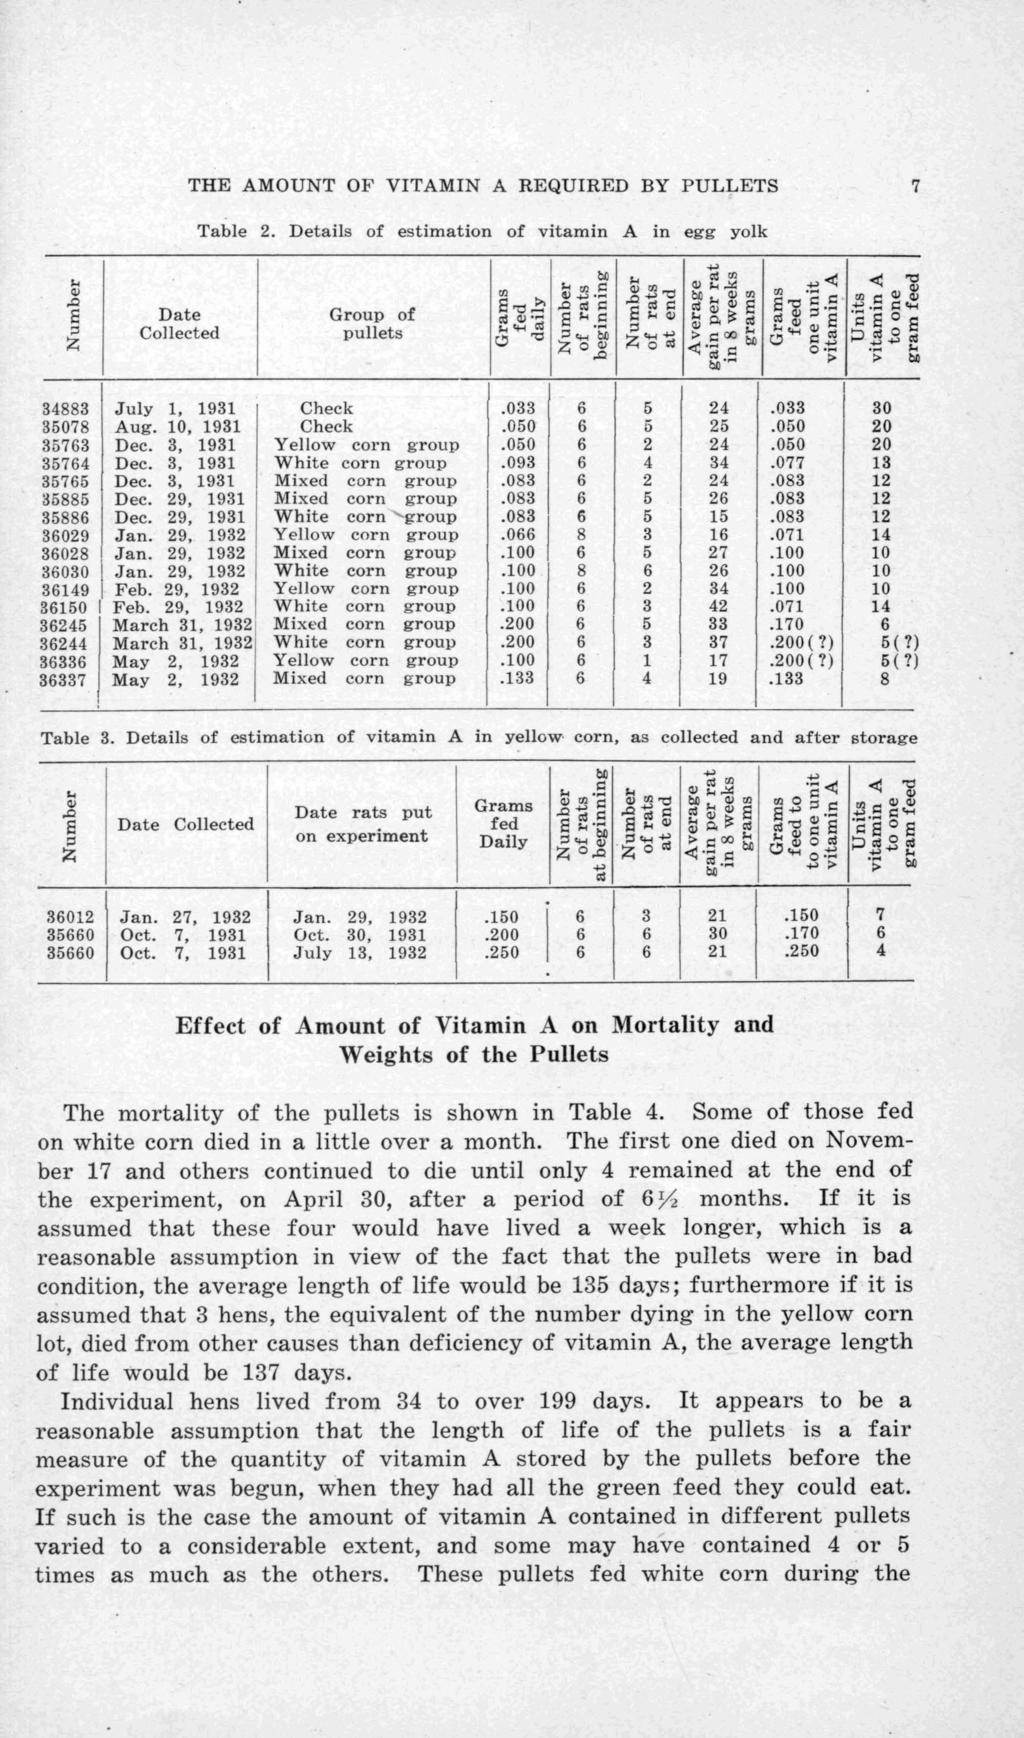 THE AMOUNT OF VITAMIN A REQUIRED BY PULLETS 7 Table 2. Details of estimation of vitamin A in egg yolk u $4 P - 34883 35078 35763 35764 35766 35885 Date Collected July 1, 1931 Aug. 10, 1931 Dec.